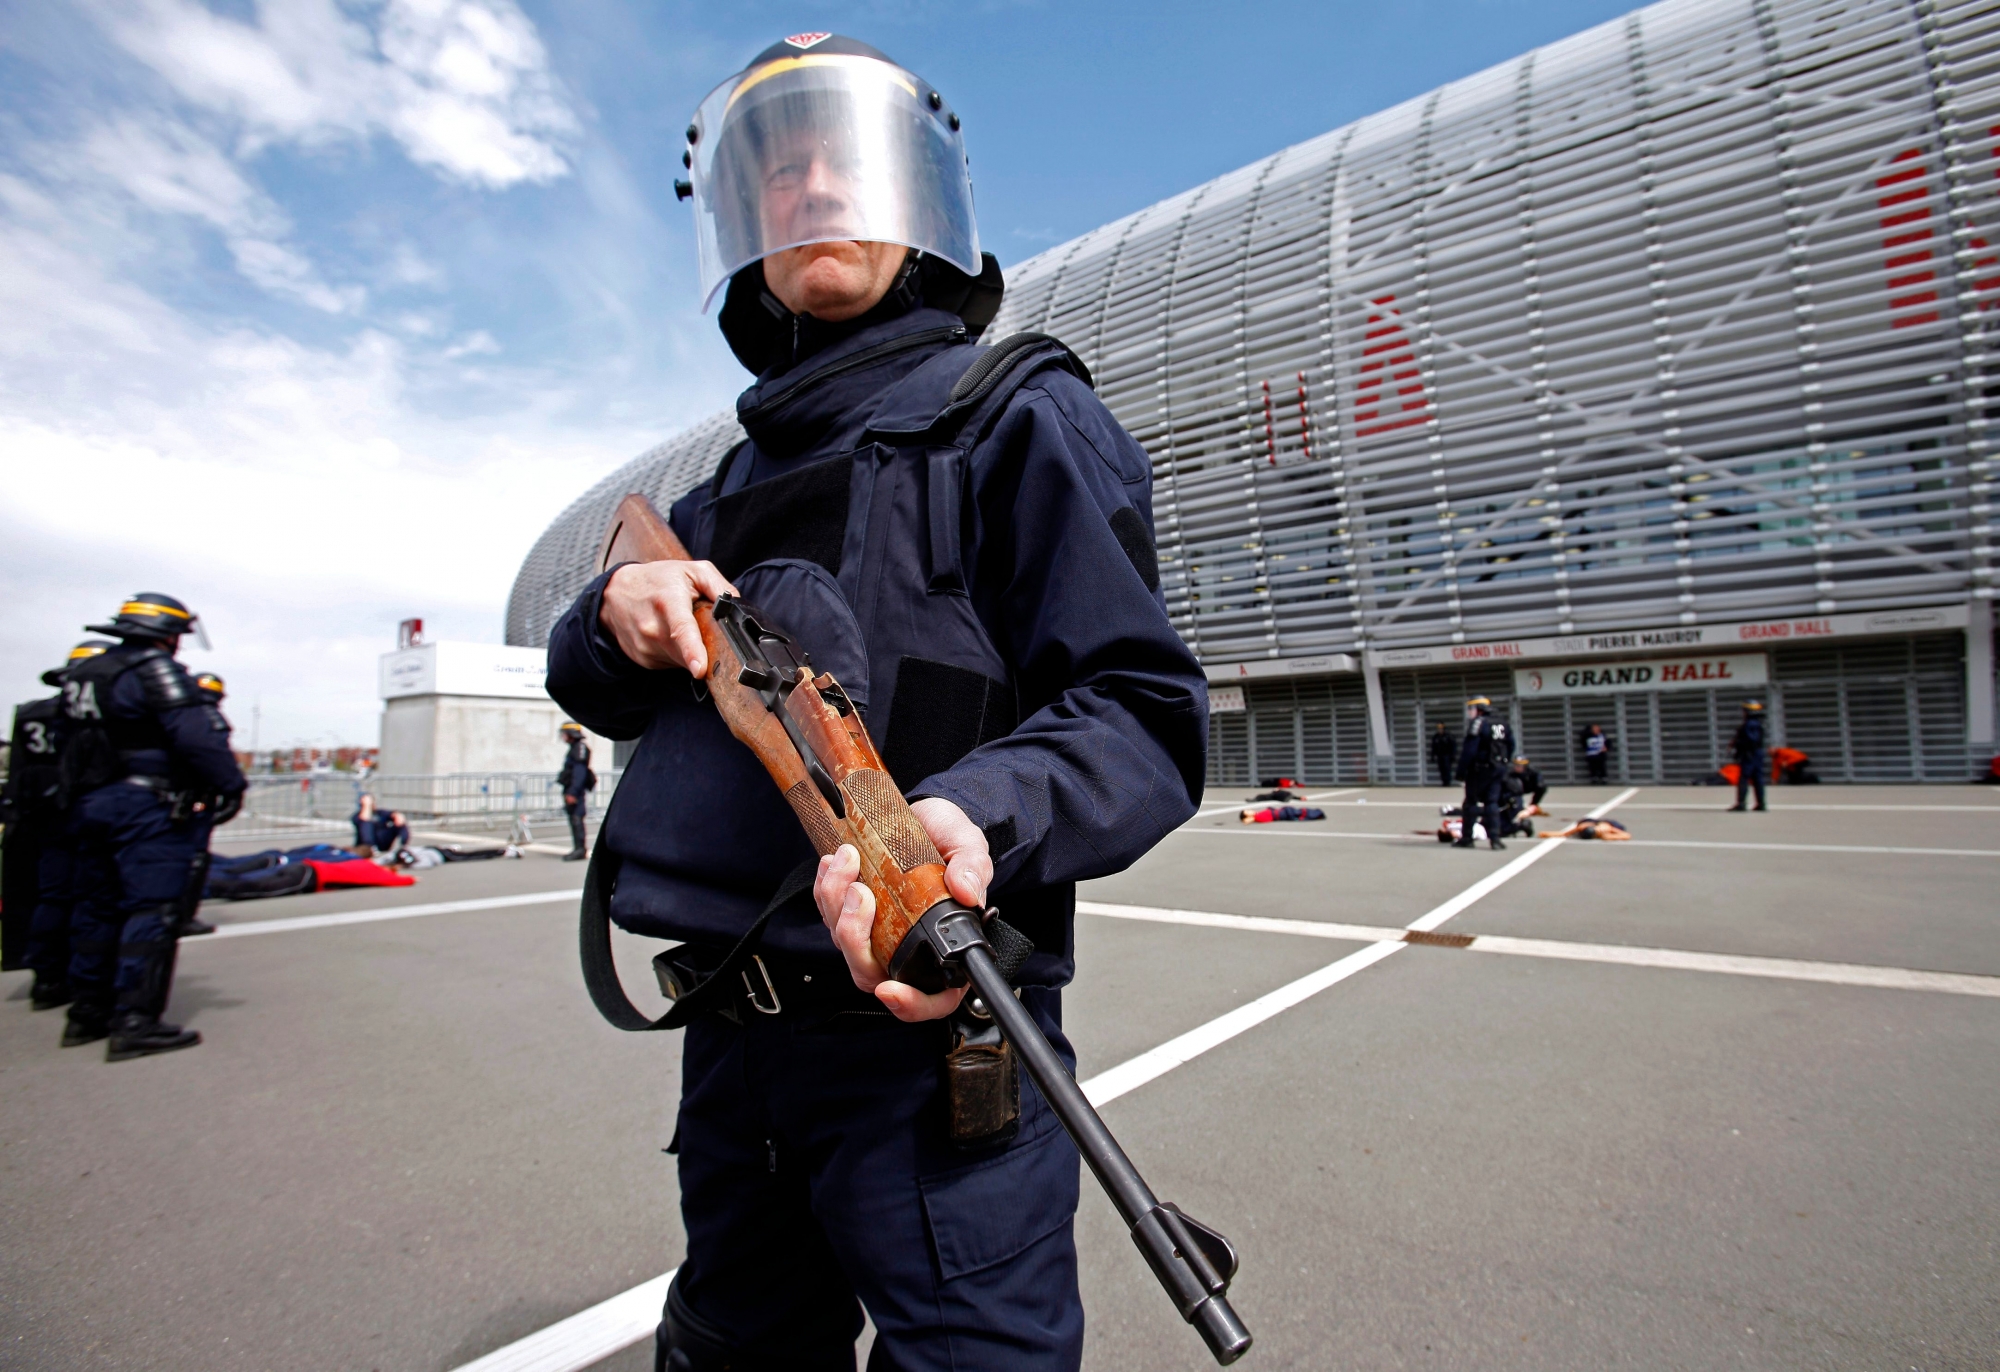 Police officers take part in a security exercise at the Pierre Mauroy Stadium, Villeneuve d'Ascq, northern France, Thursday April 21, 2016. France's government is calling for a two-month extension of the state of emergency that was declared after the deadly Nov. 13 attacks in Paris, the country's prime minister said Wednesday. Following attacks in Brussels last month, concerns have been raised that Euro 2016 could be targeted, especially the fan zones where spectators gather to watch games on large screens. (AP Photo/Michel Spingler) FUSSBALL EURO 2016 SICHERHEIT